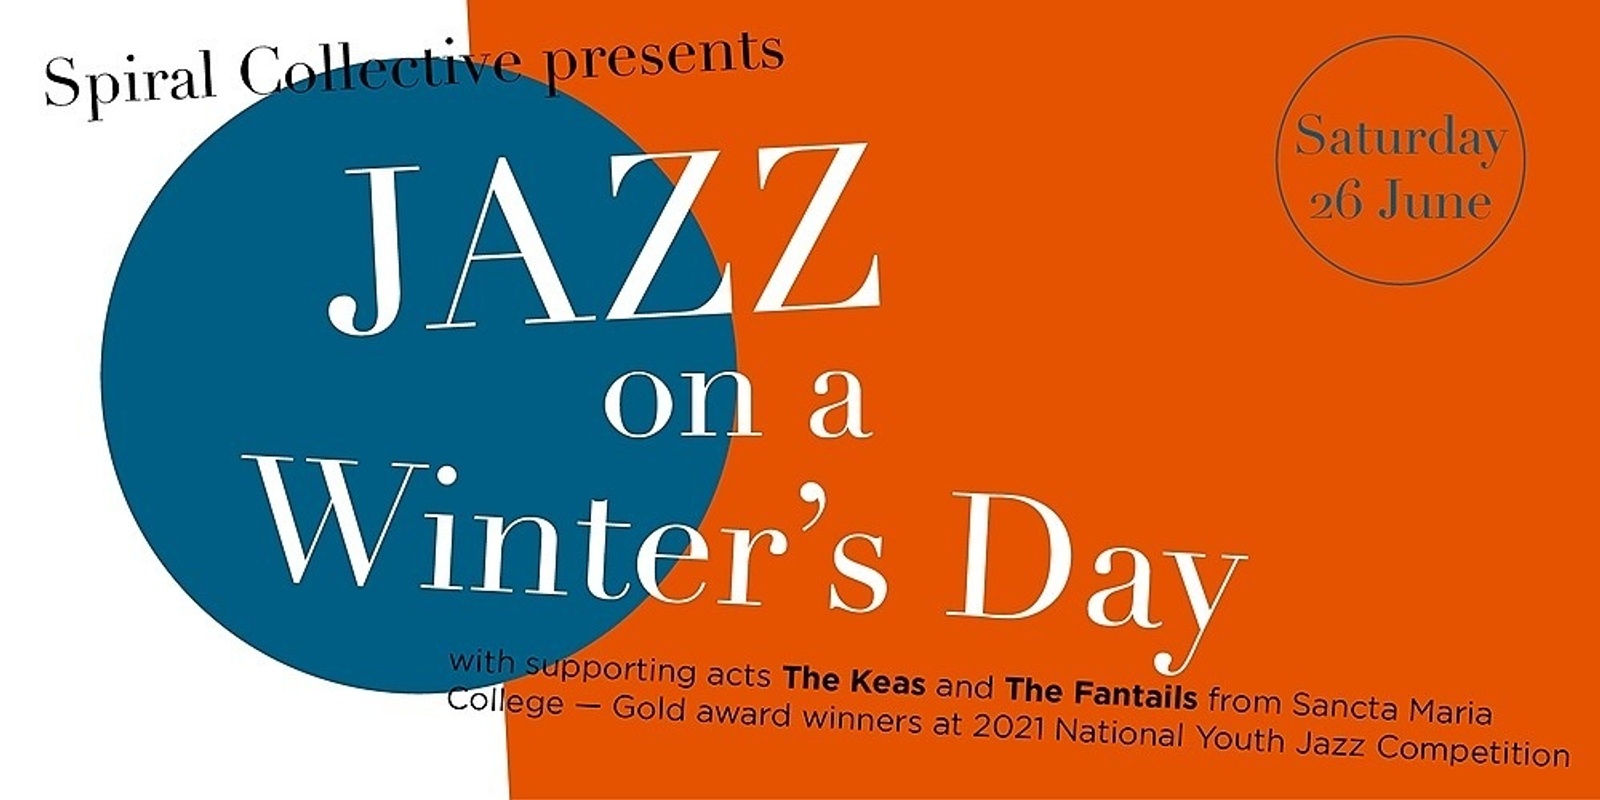 Banner image for Jazz on a Winter's Day with Spiral Collective & The Keas